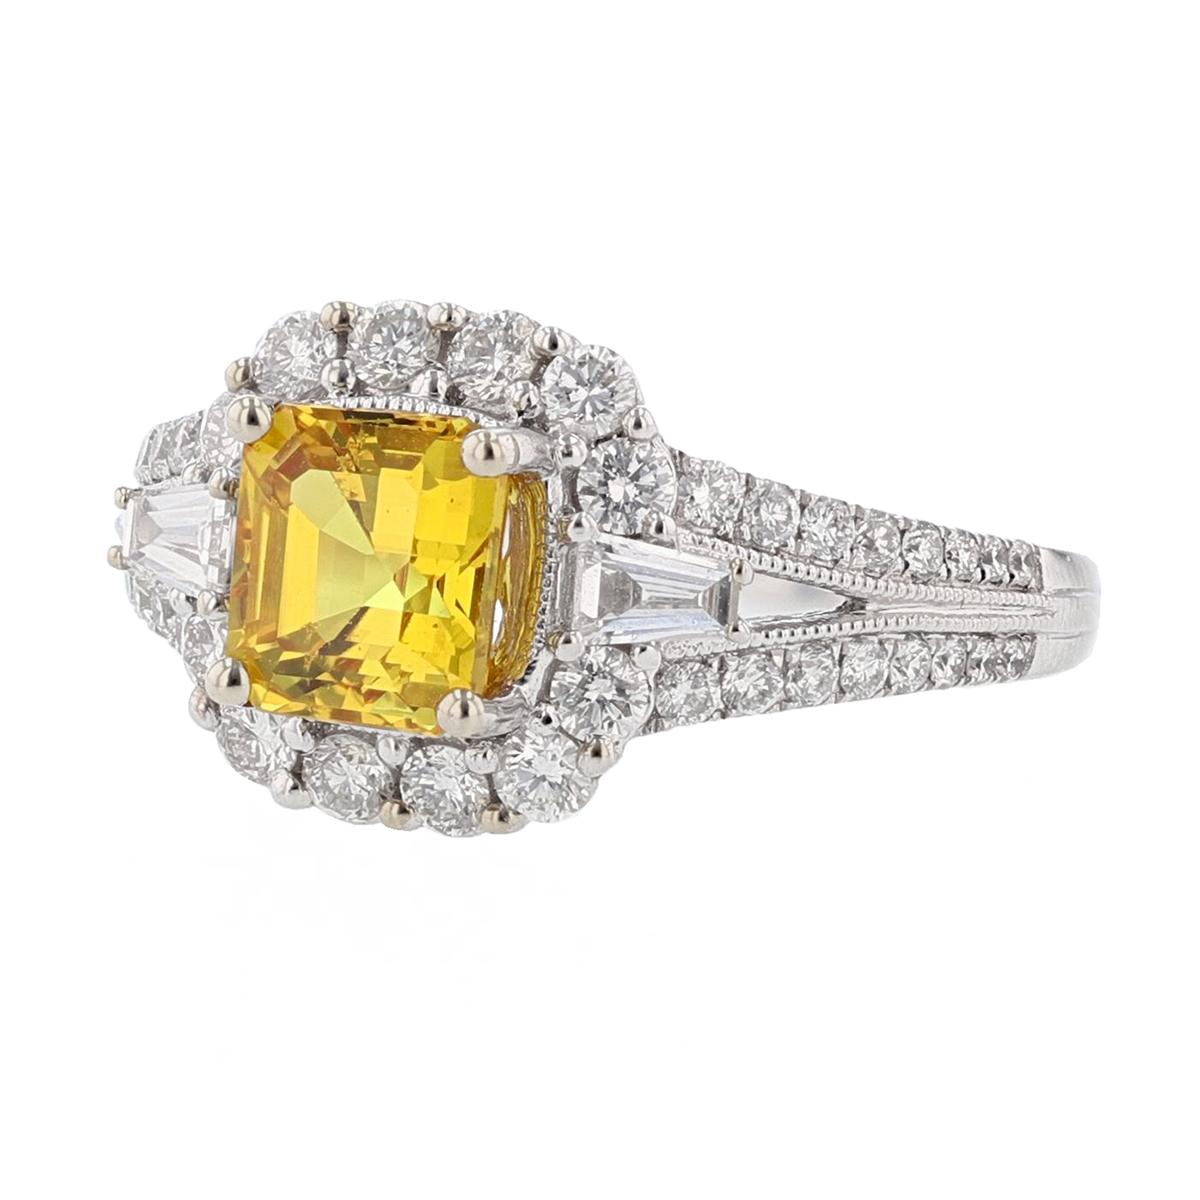 This ring is set in 18 karat white gold. The center stone is an Emerald cut Yellow Sapphire weighing 1.95 carats and is prong set. The Sapphire is AGL Certified (AGL-GB51156). The mounting features 44 round cut diamonds weighing 0.69cts and 2